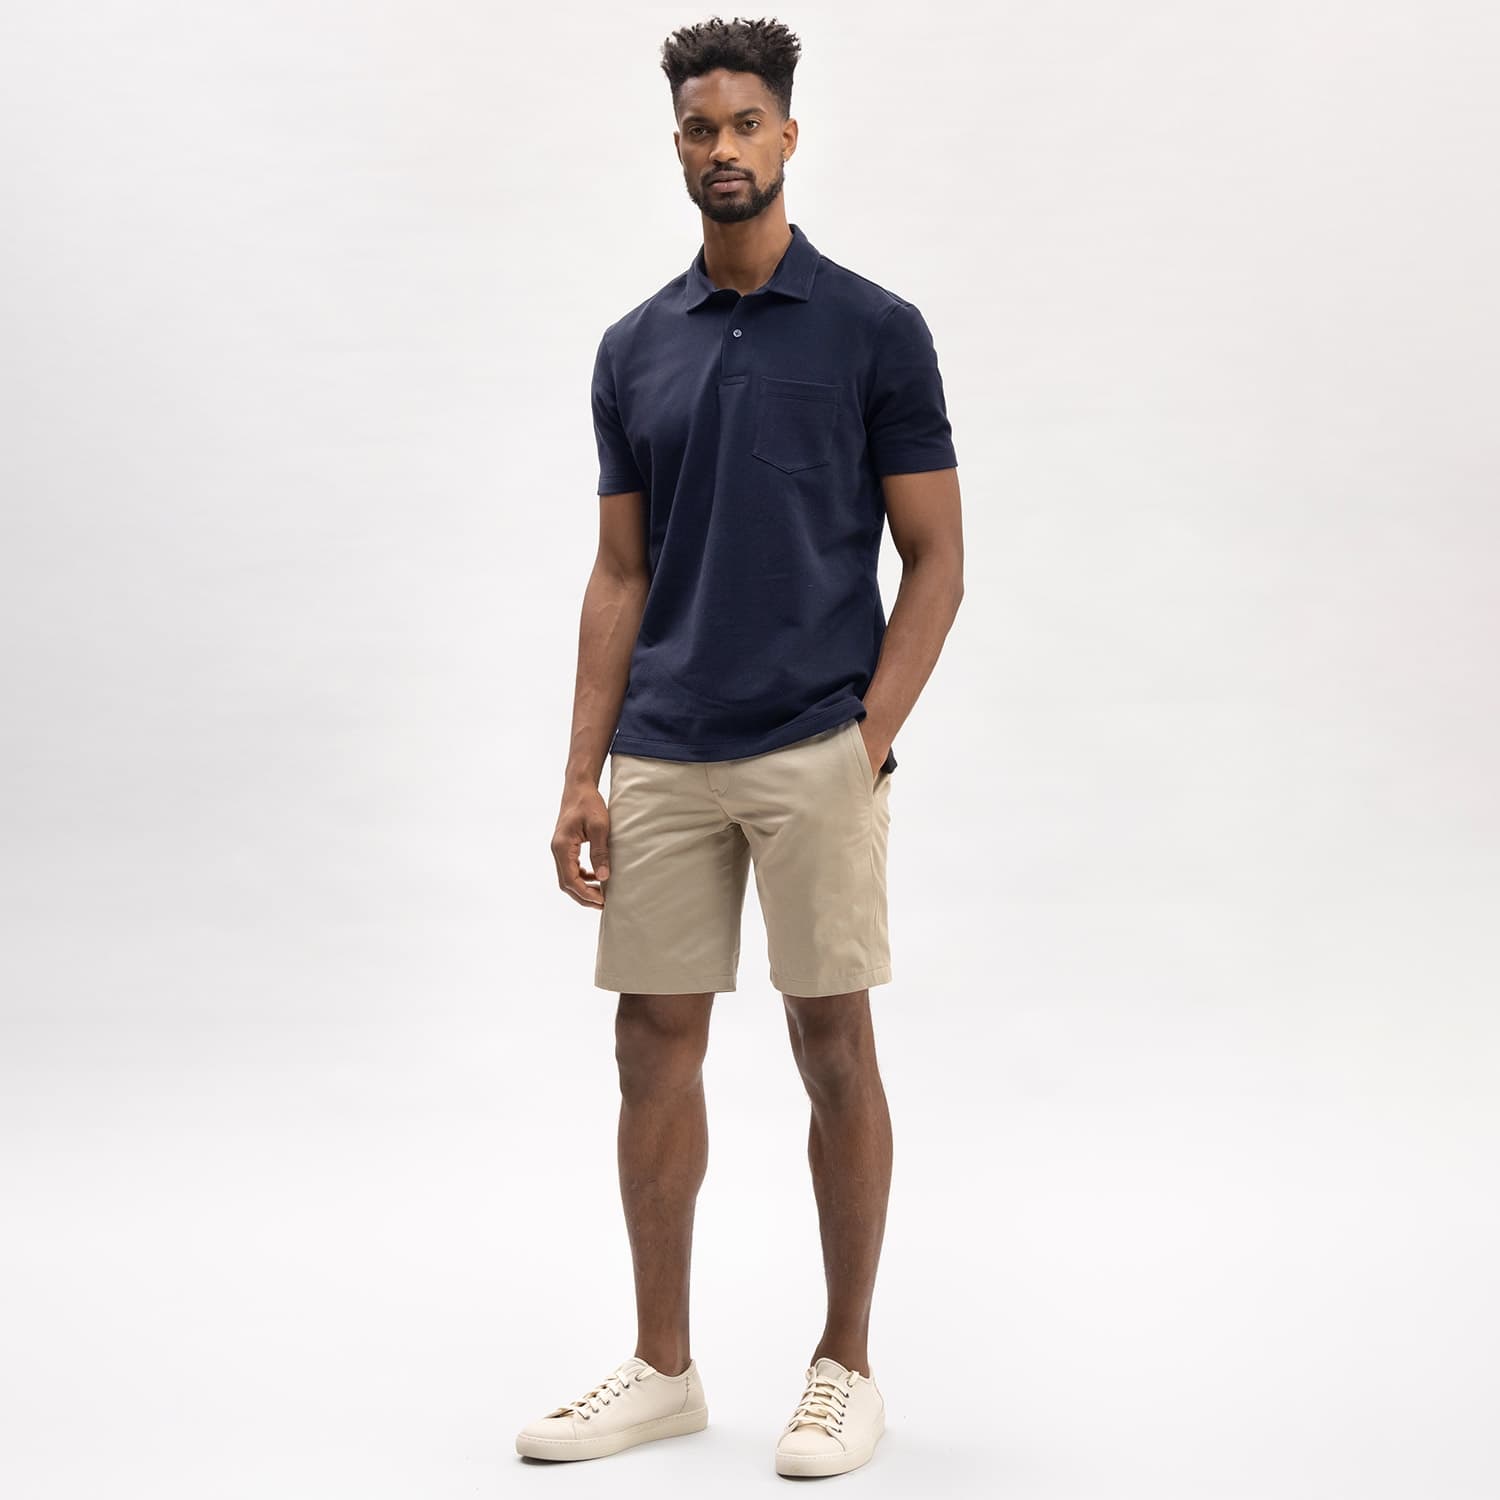 Pique Polo Navy - Polo shirts made in USA from Portuguese fabric